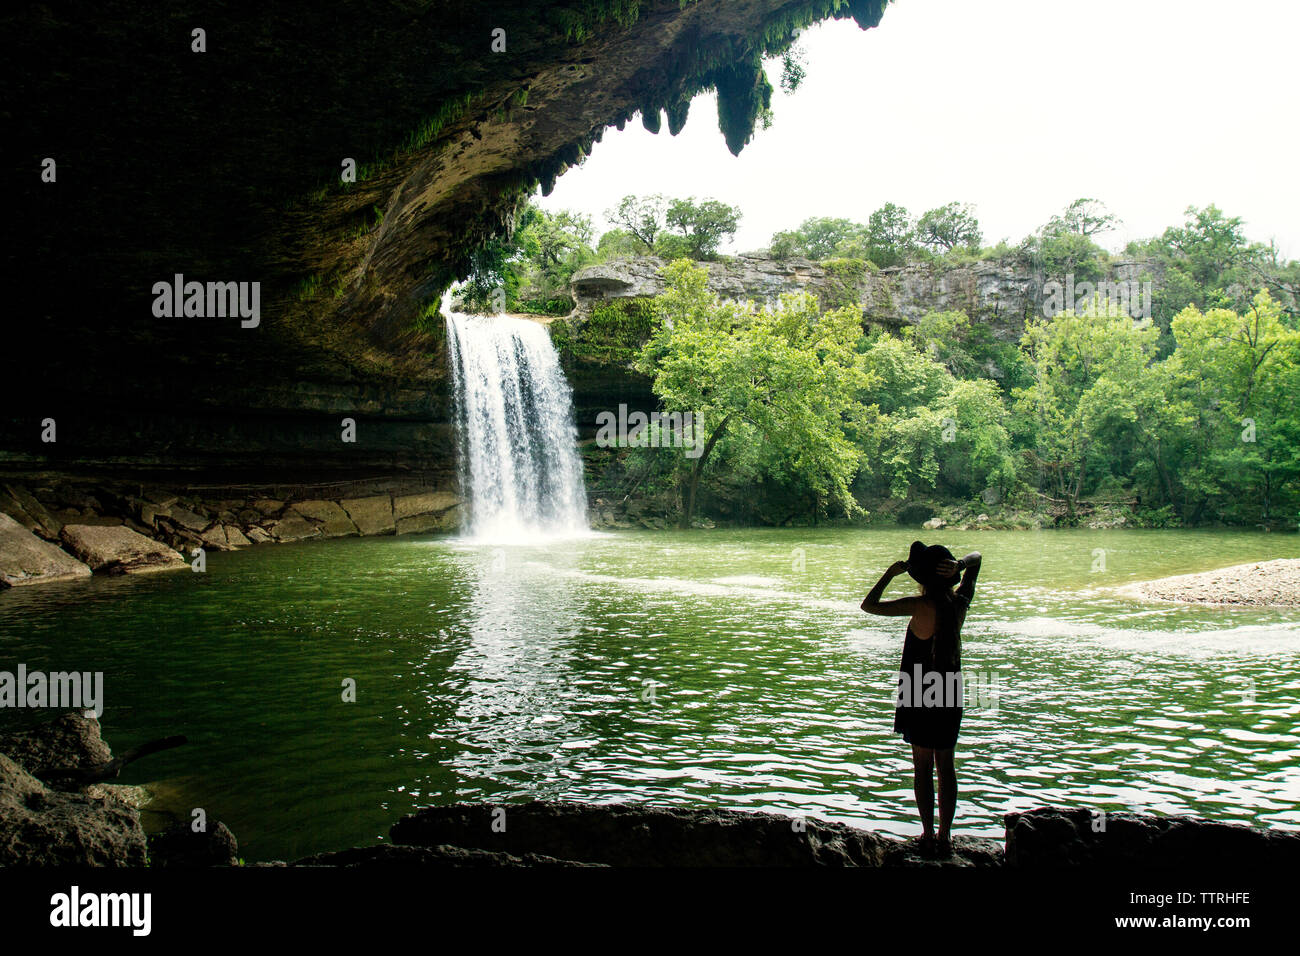 Woman looking at scenic waterfall in forest against clear sky Stock Photo